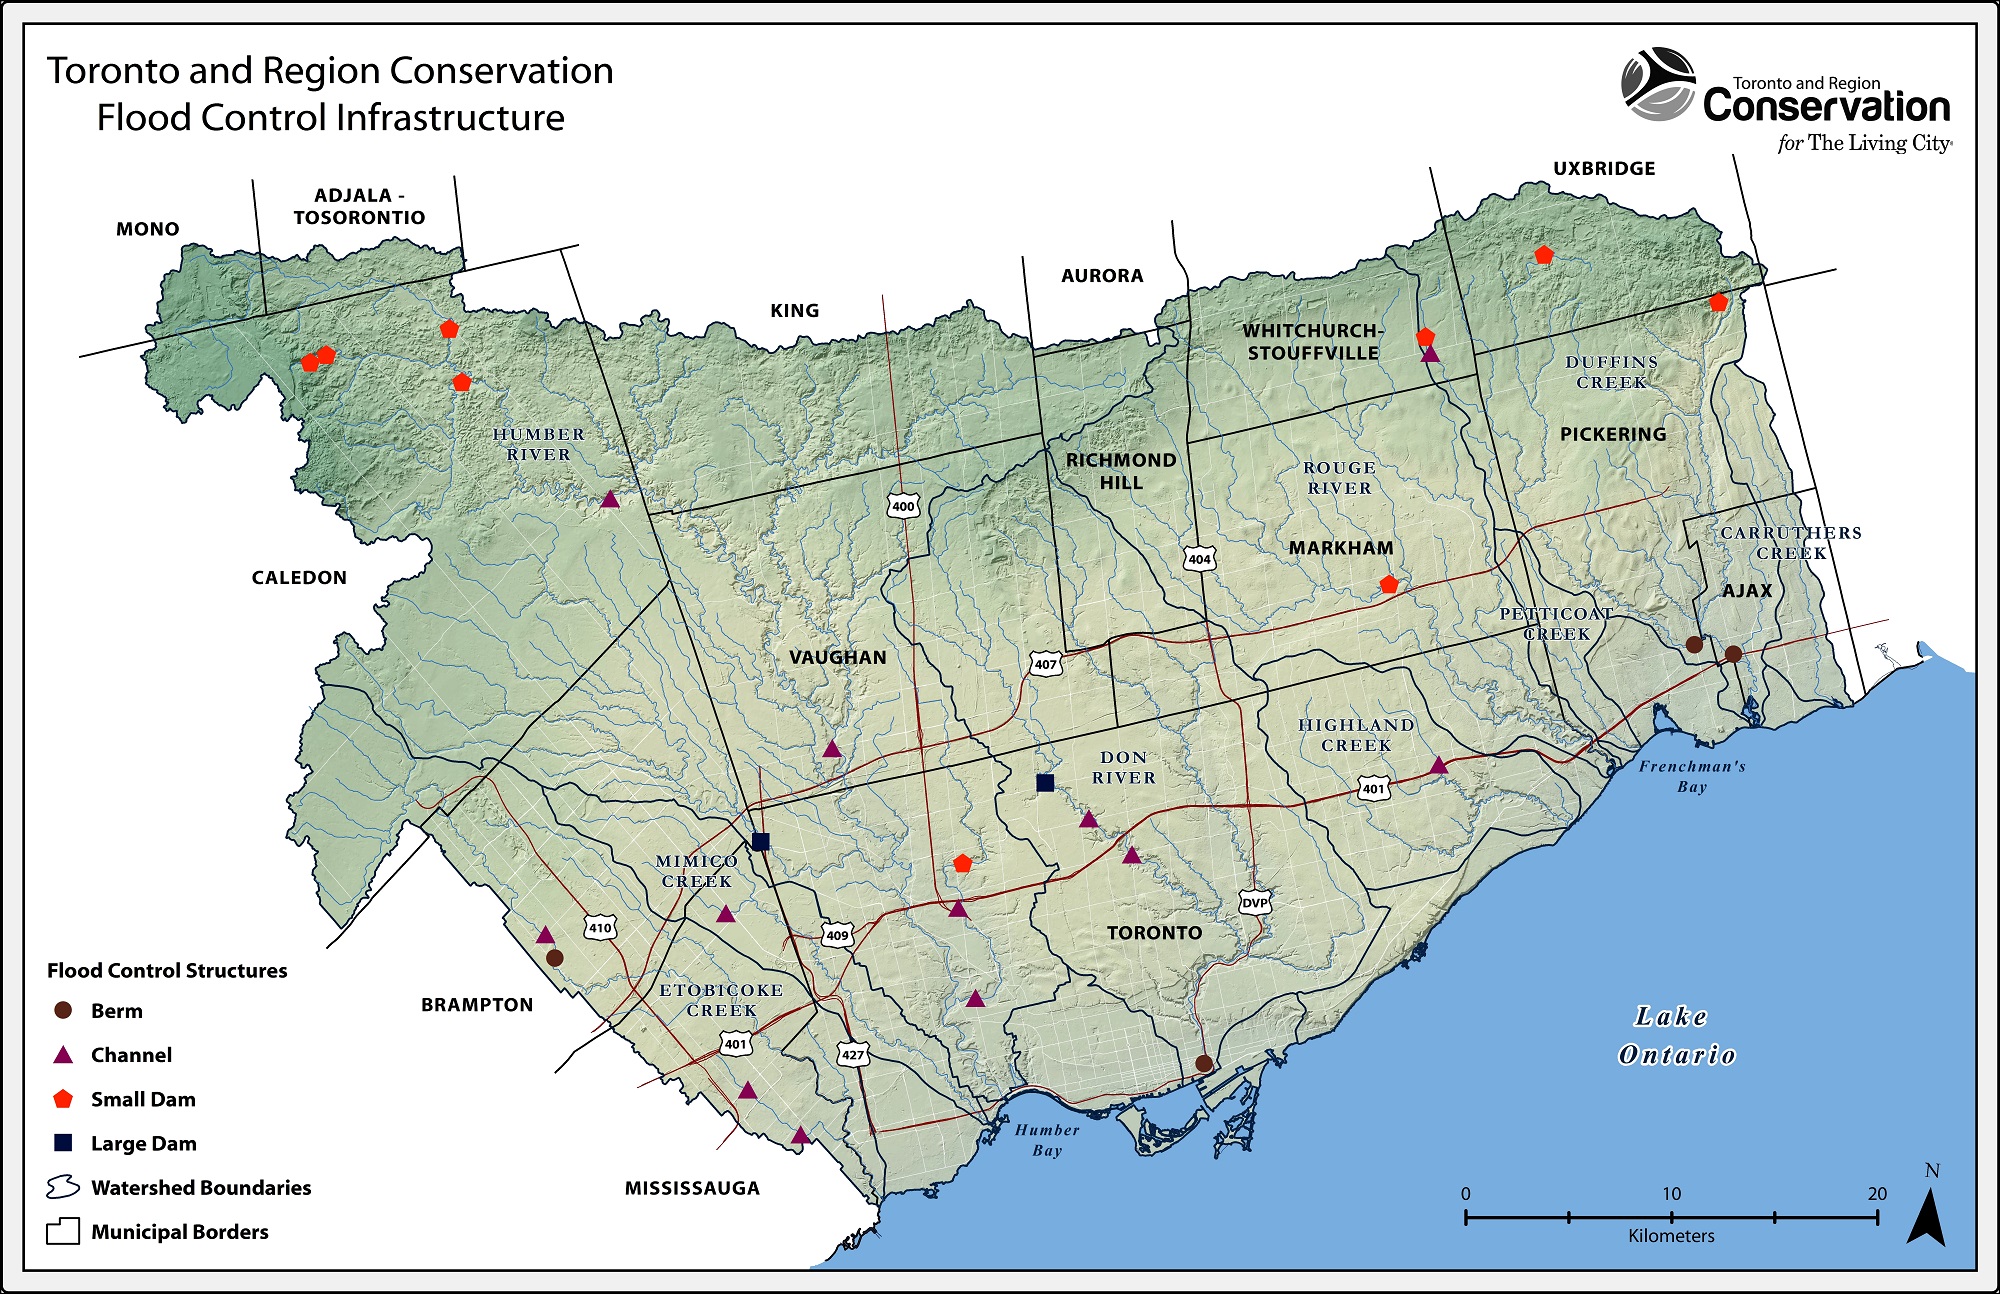 TRCA Flood Control structures map